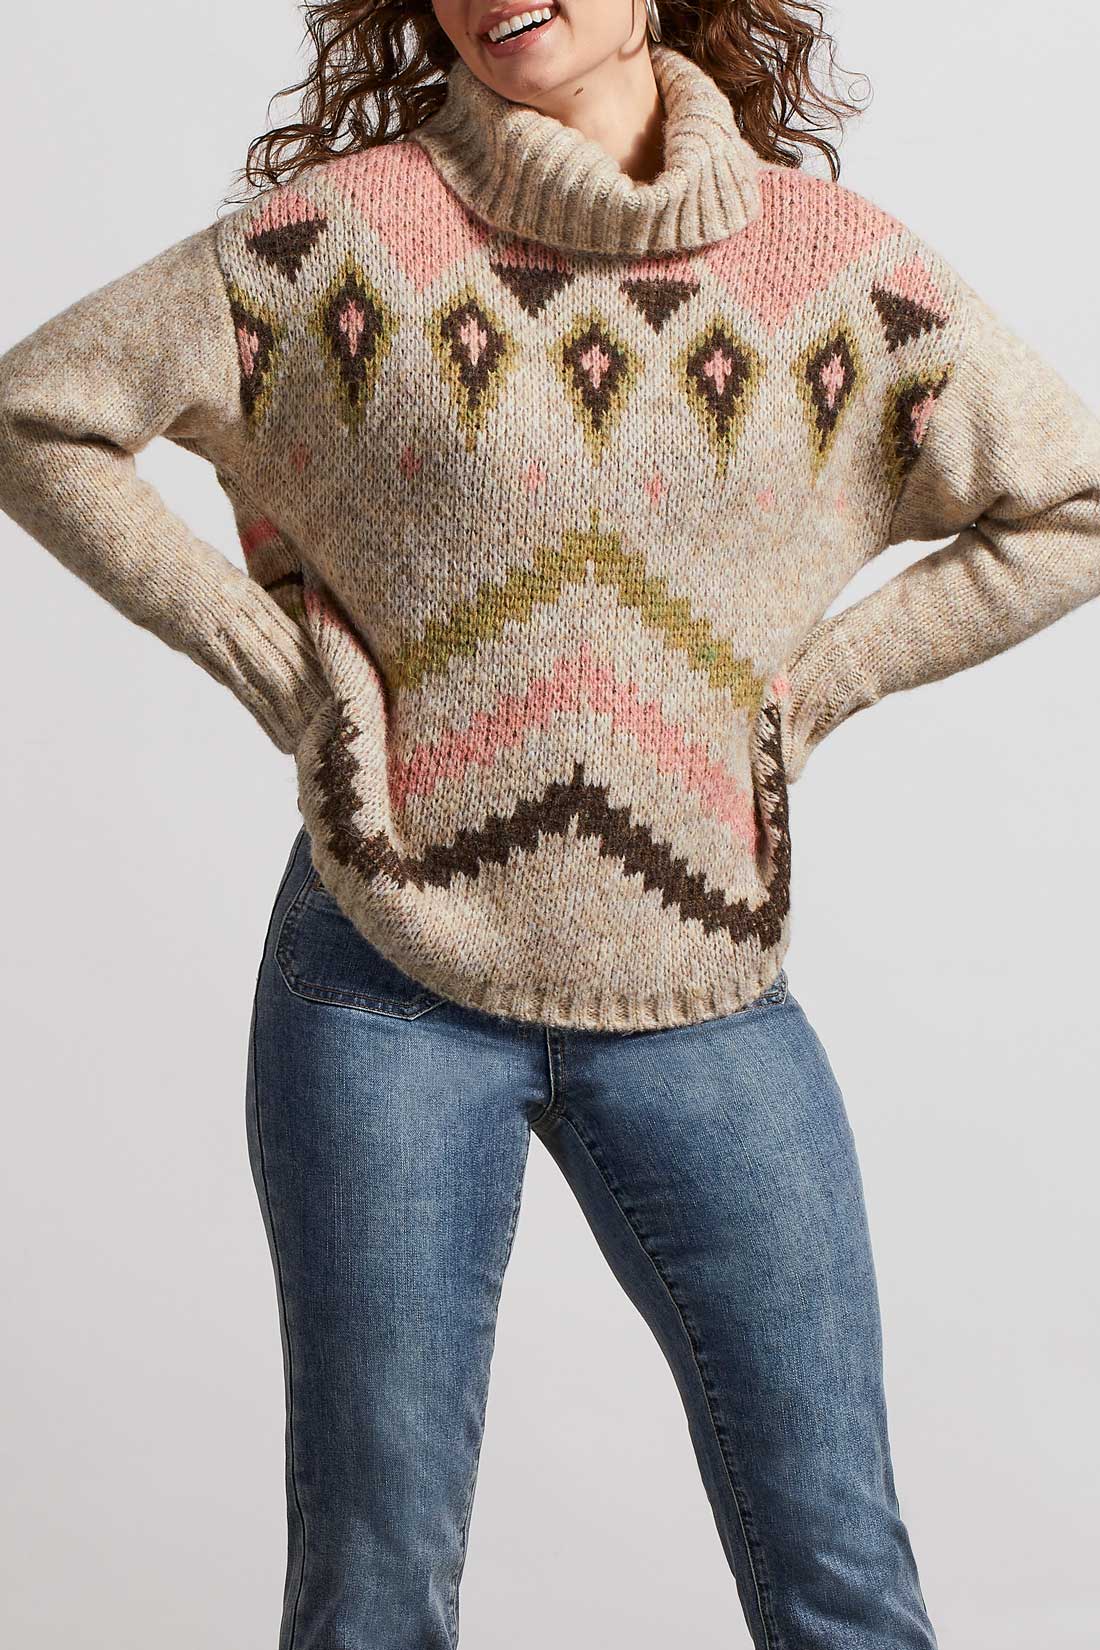 Tribal Megan Turtleneck - Oatmeal Clothing - Tops - Sweaters - Pullovers - Heavy Knit Pullovers by Tribal | Grace the Boutique